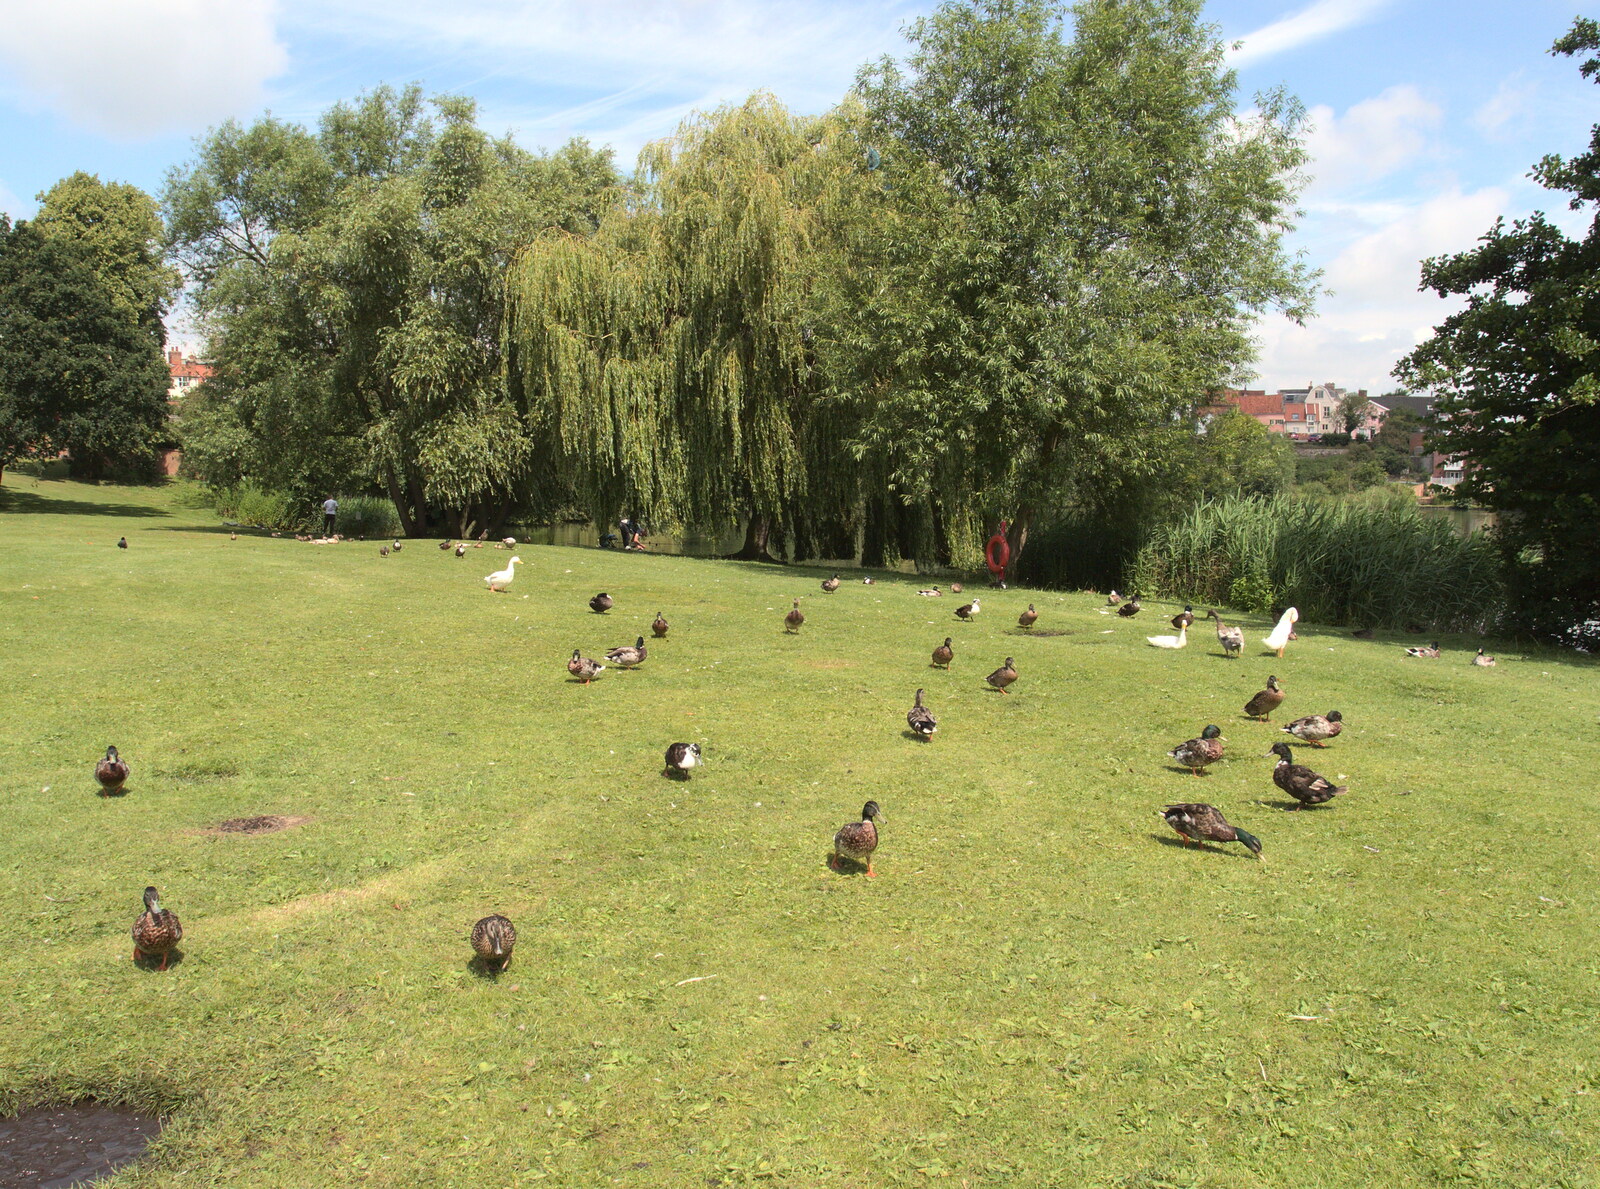 Ducks on the park from A Busy Day and a Church Fair, Diss, Norfolk - 28th June 2014